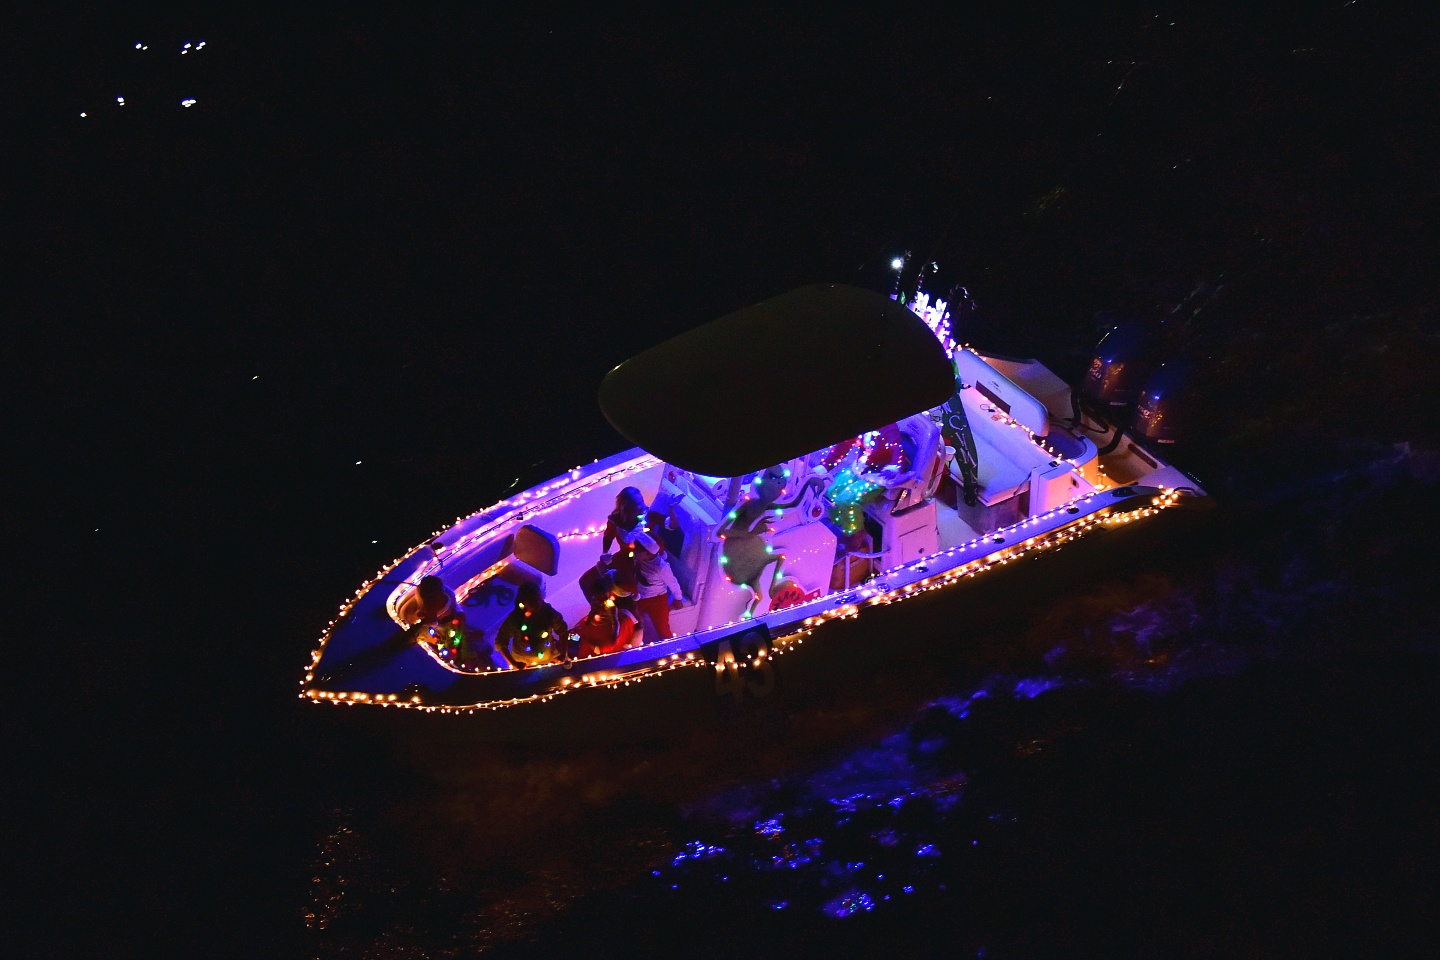 Reel Busy, boat number 43 in the 2021 Winterfest Boat Parade